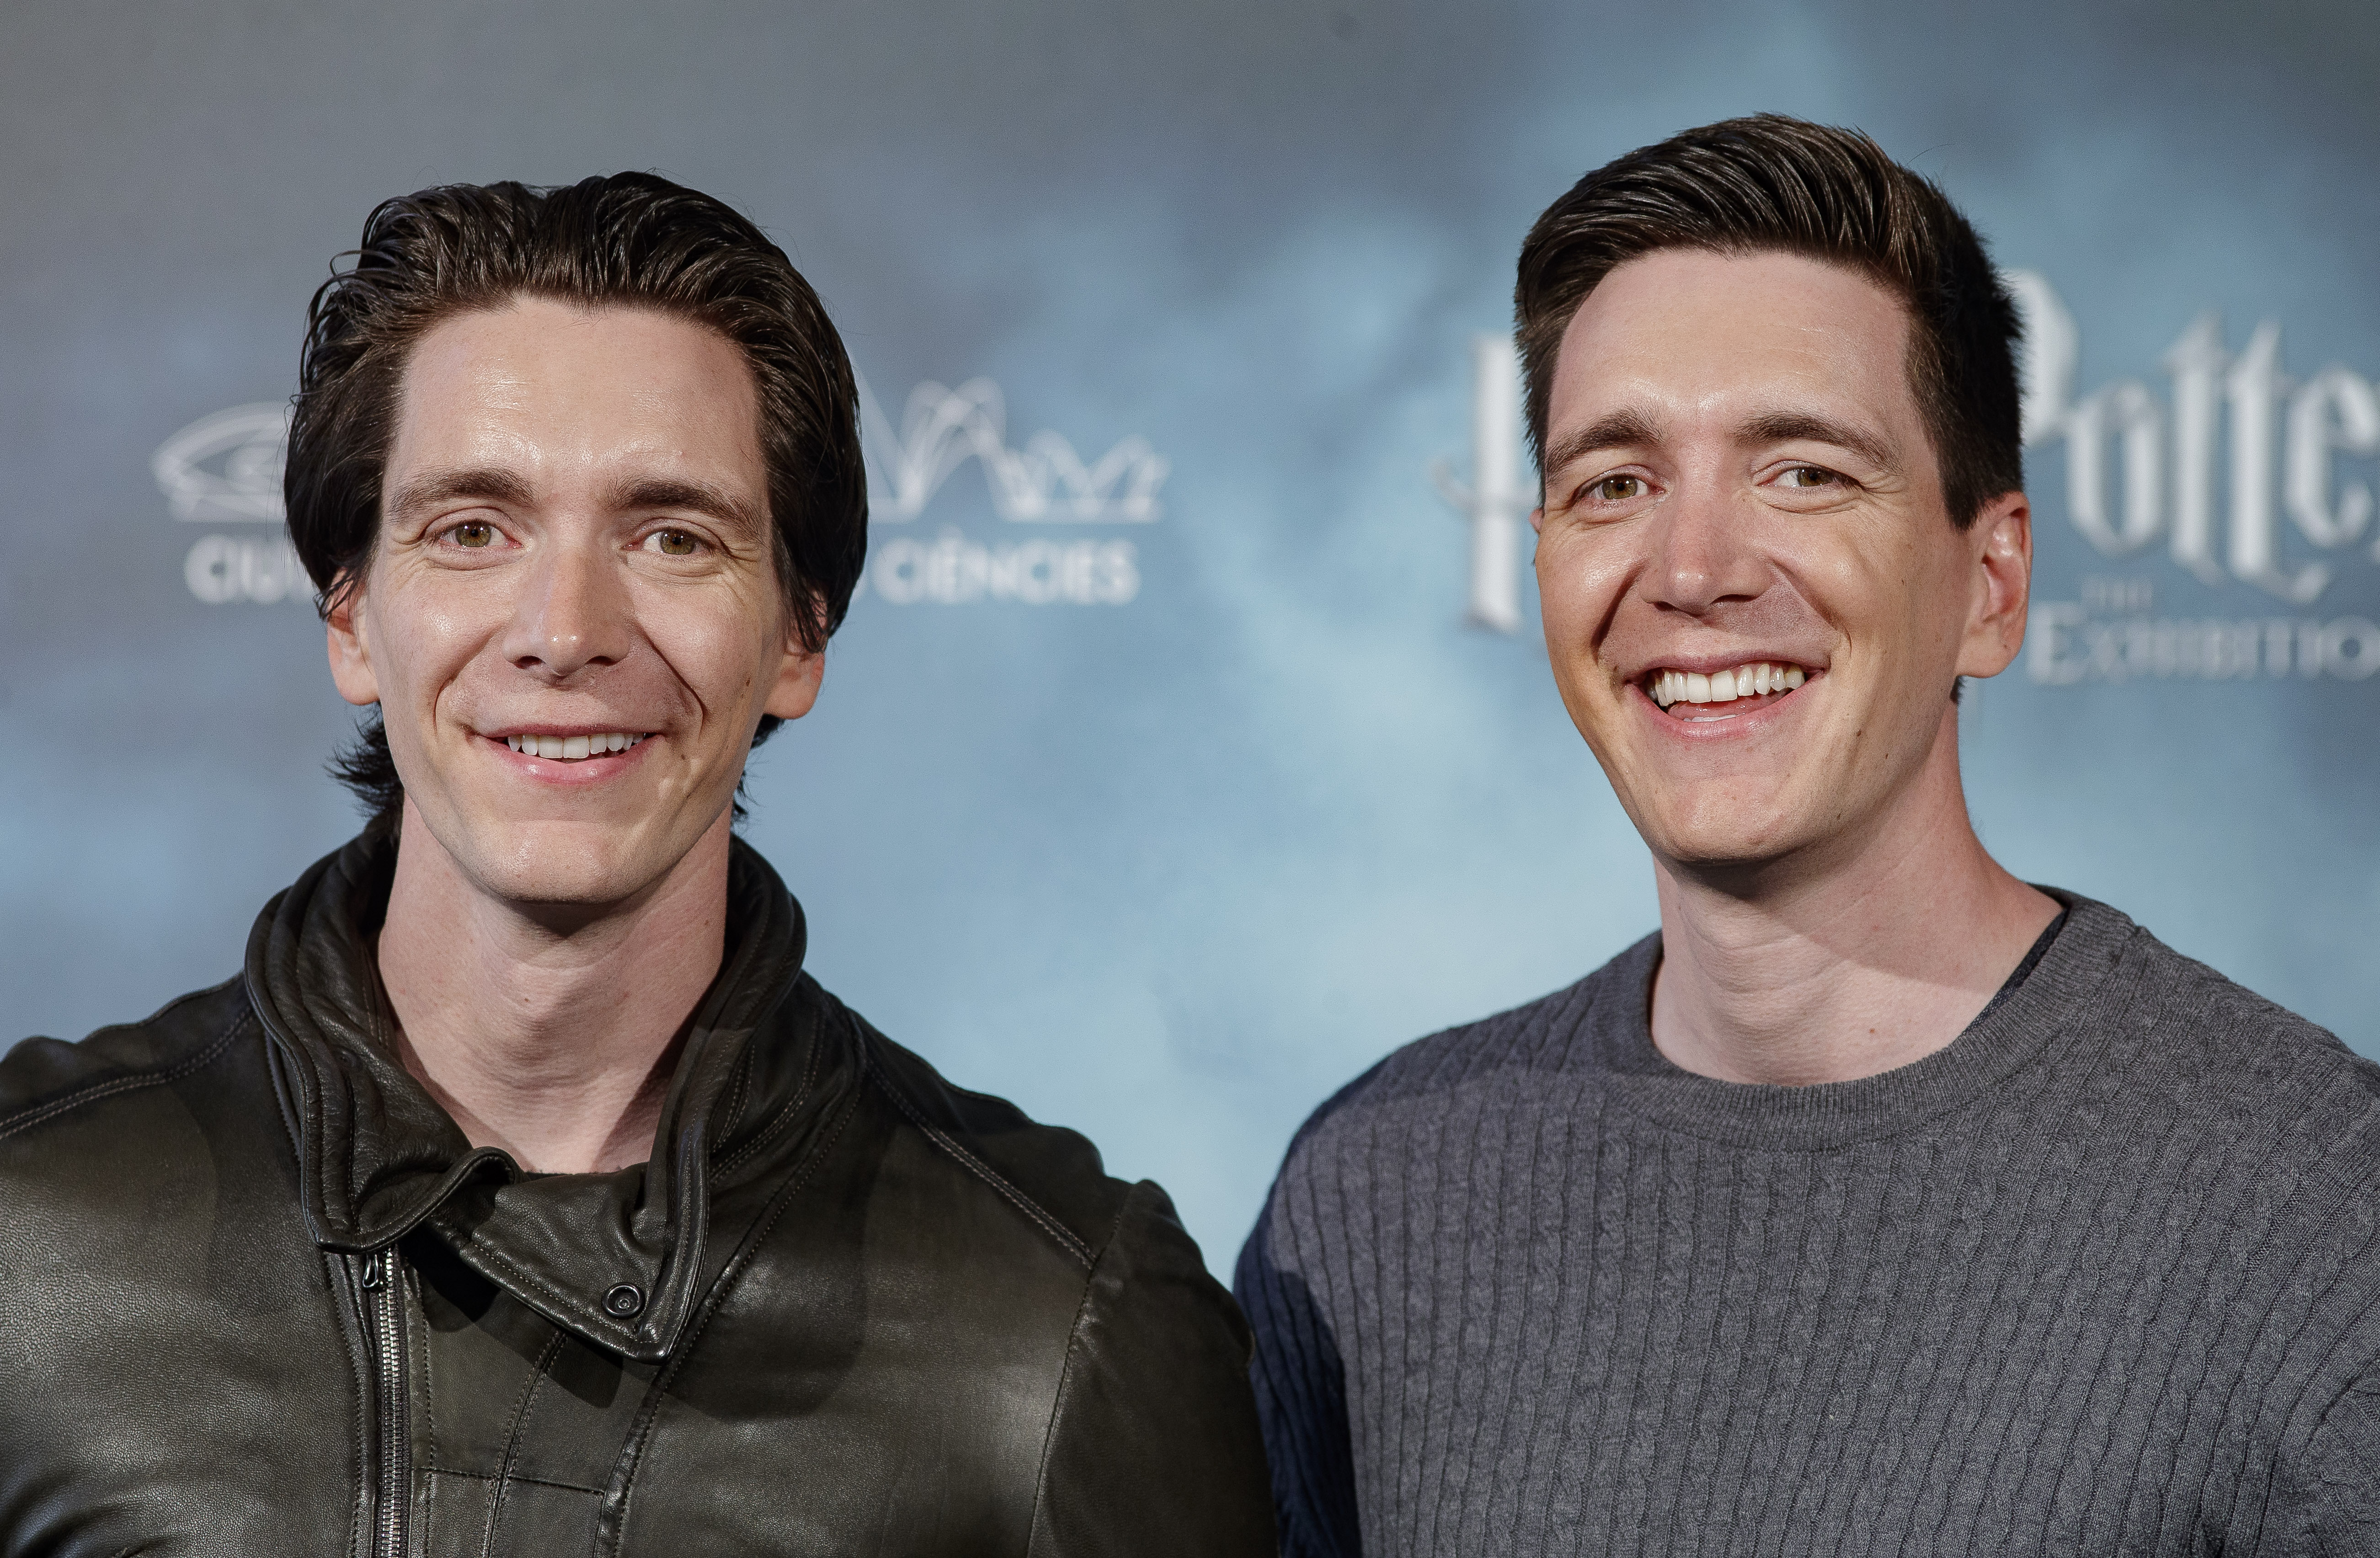 James Phelps and Oliver Phelps attend the 